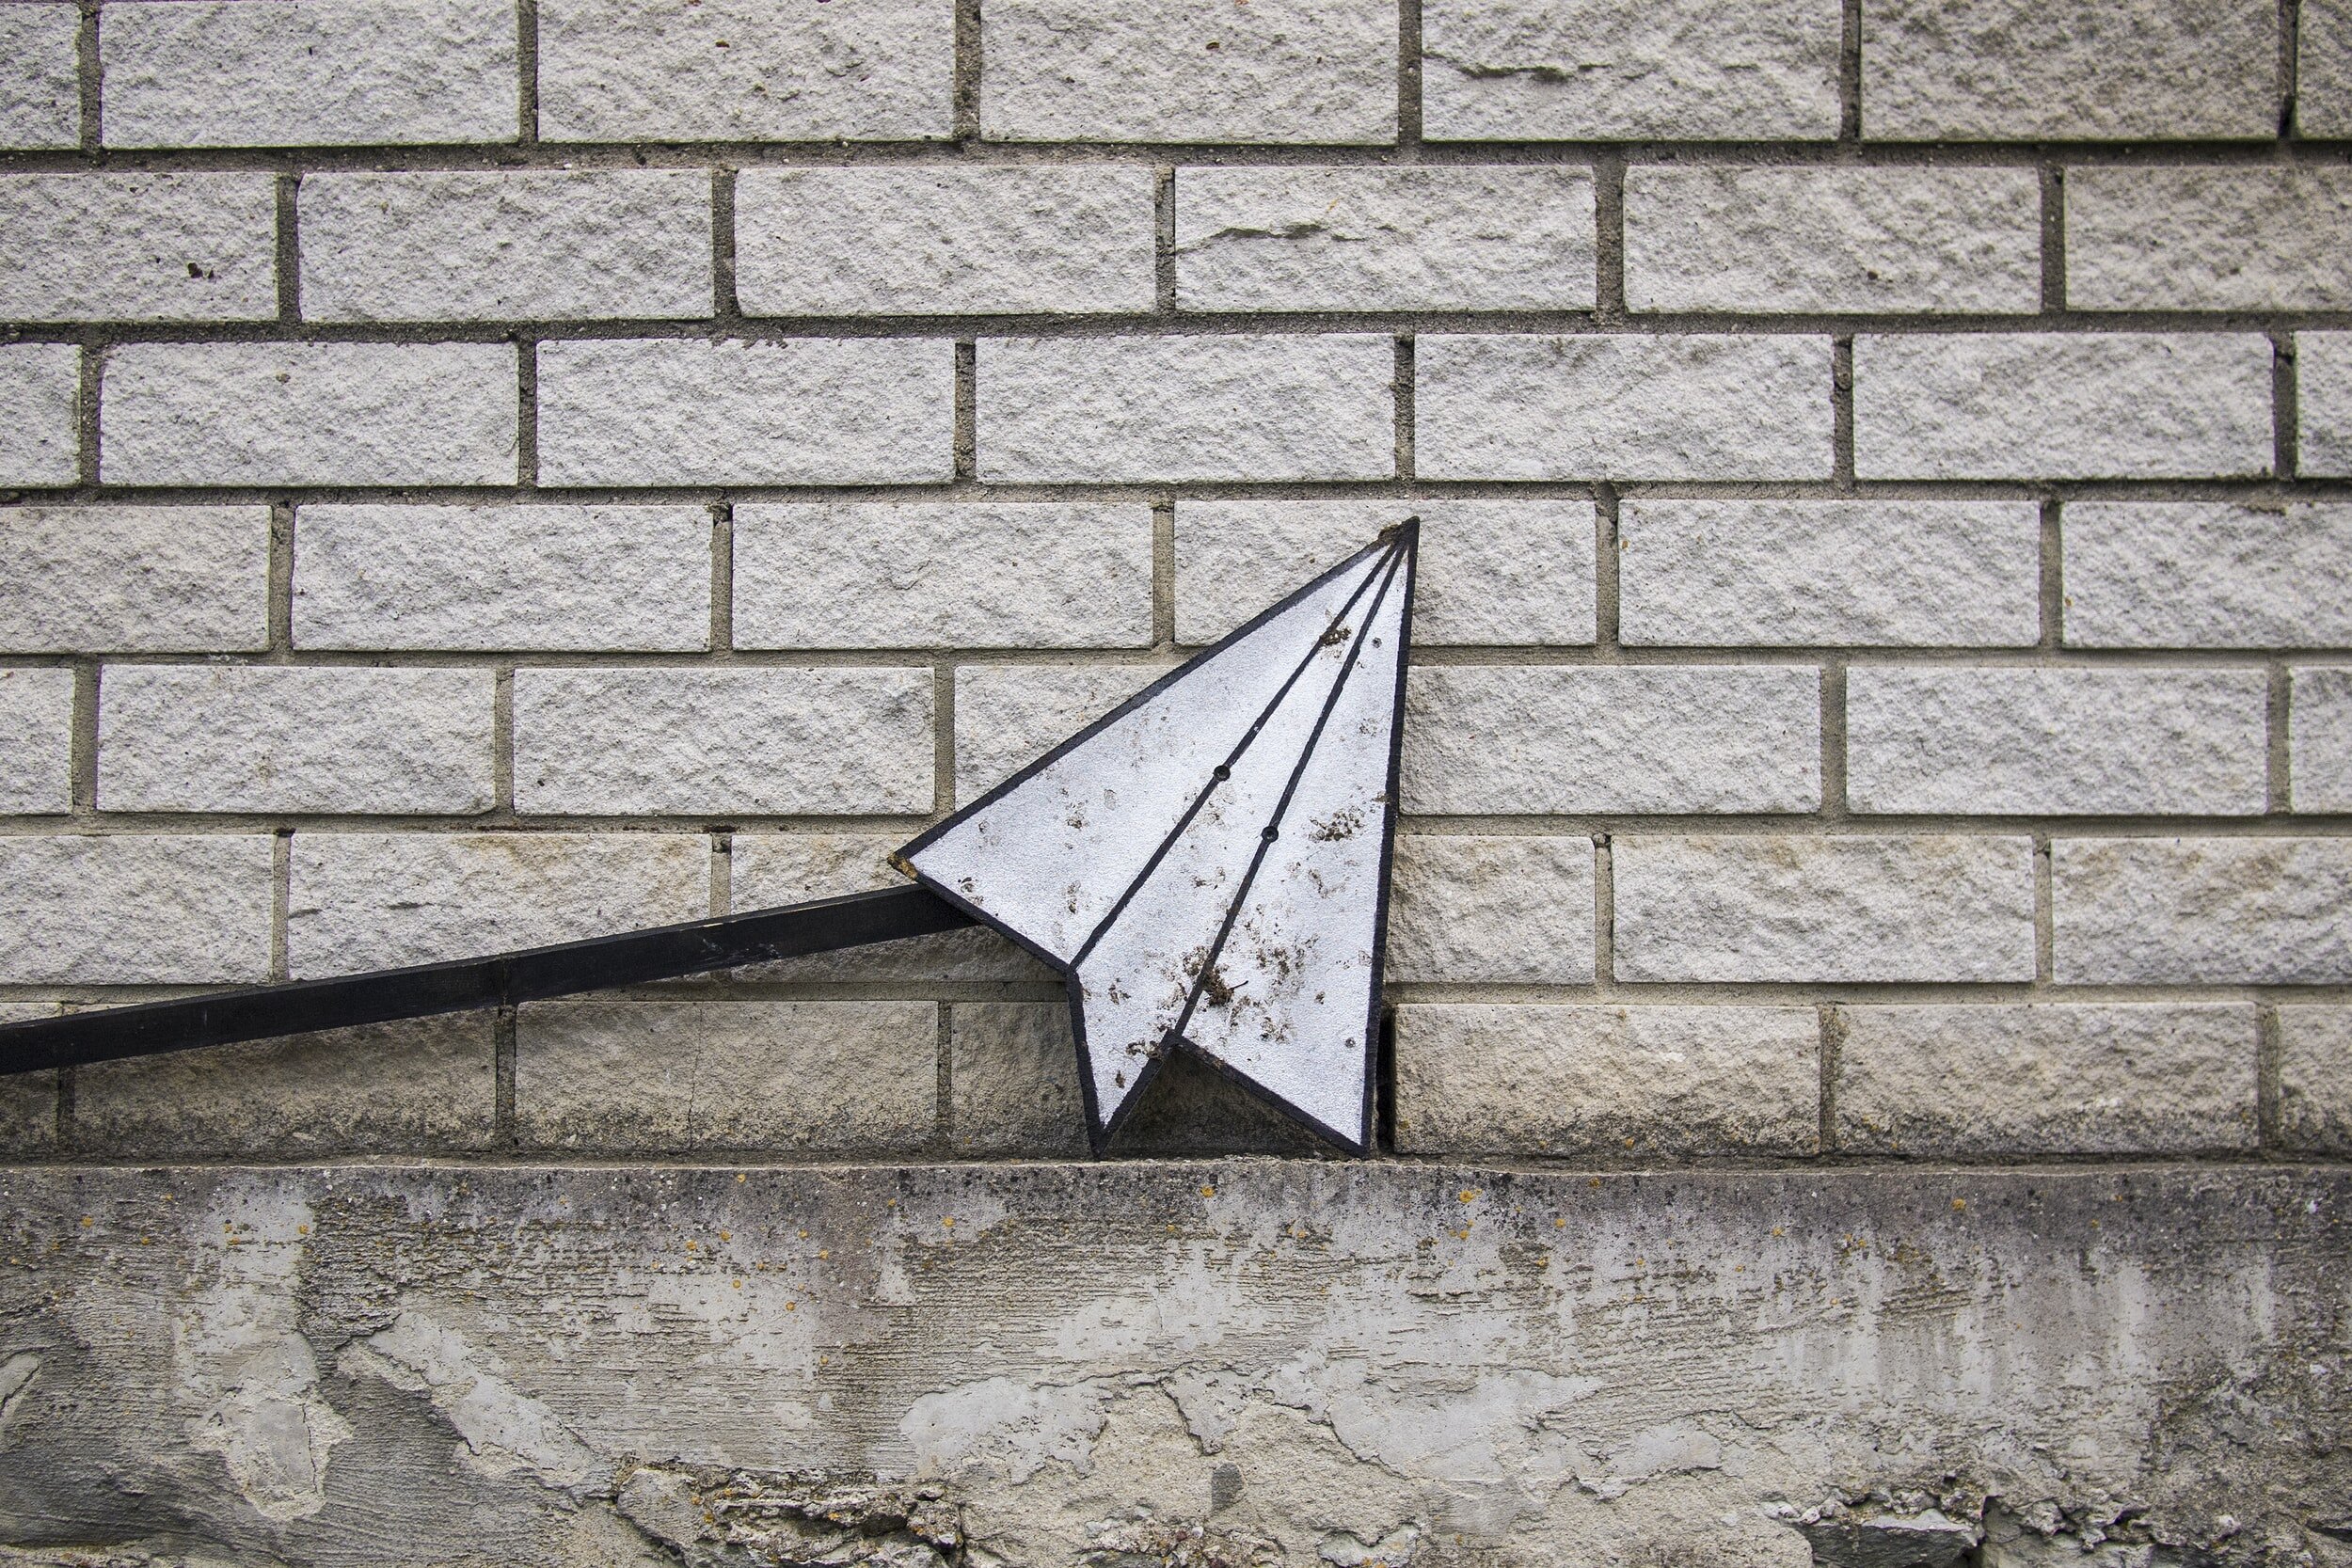 Image: This piece of street art is a sculpture that looks like a paper airplane or the symbol for a DM on Instagram. It’s propped up against a white brick wall with the nose facing upward, like a message waiting to be sent.